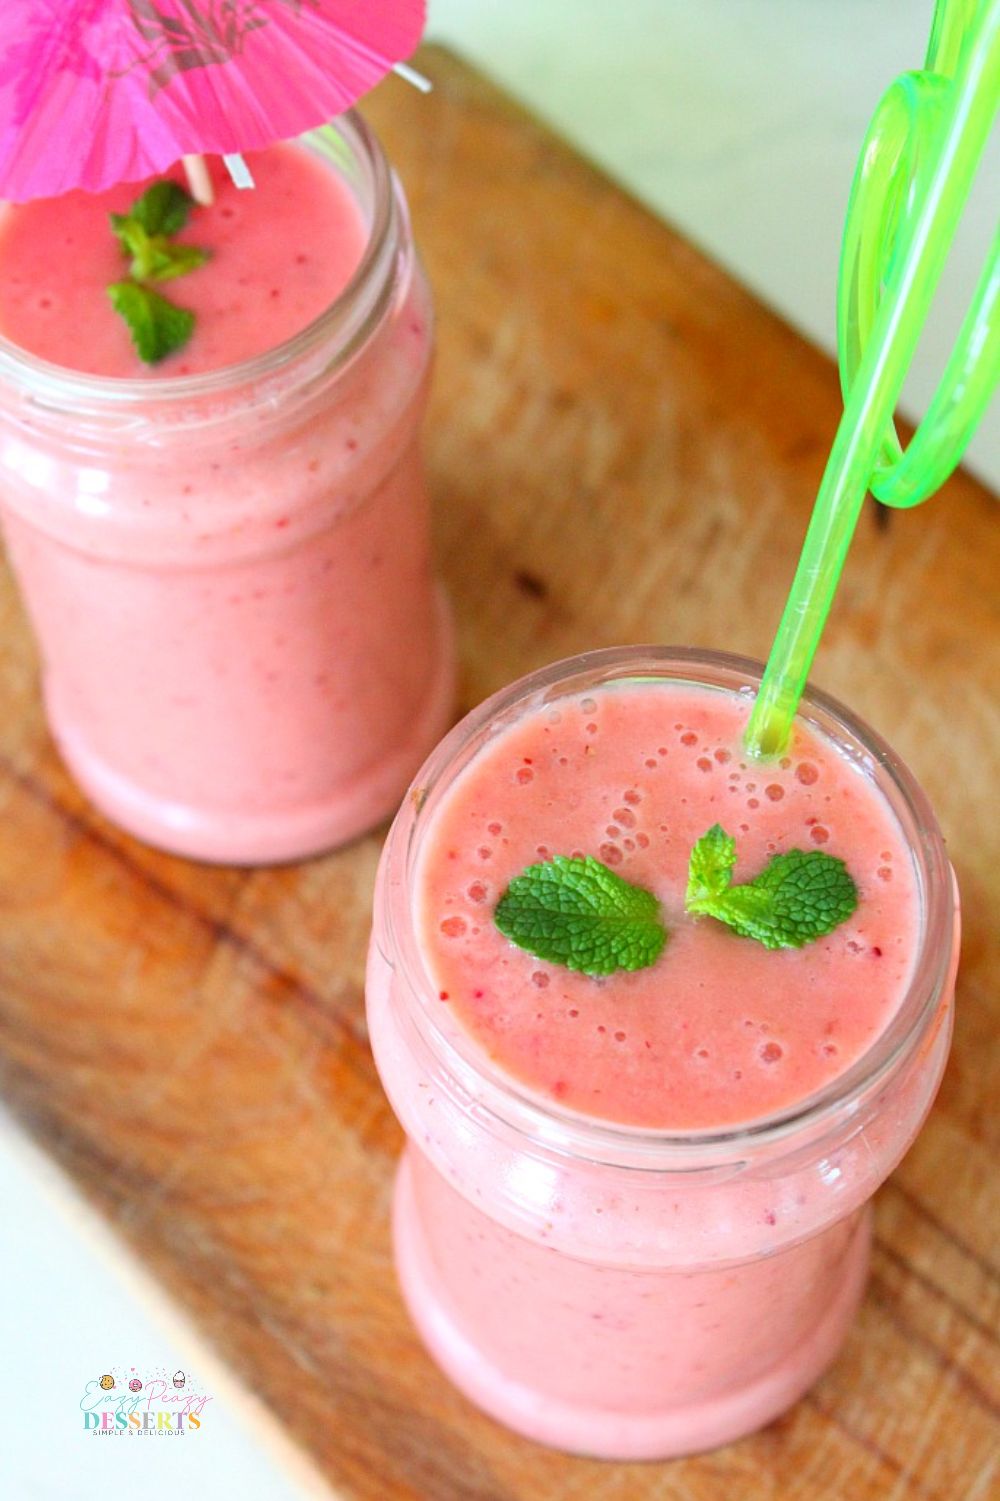 Angled image of jars filled with strawberry protein fruit smoothie